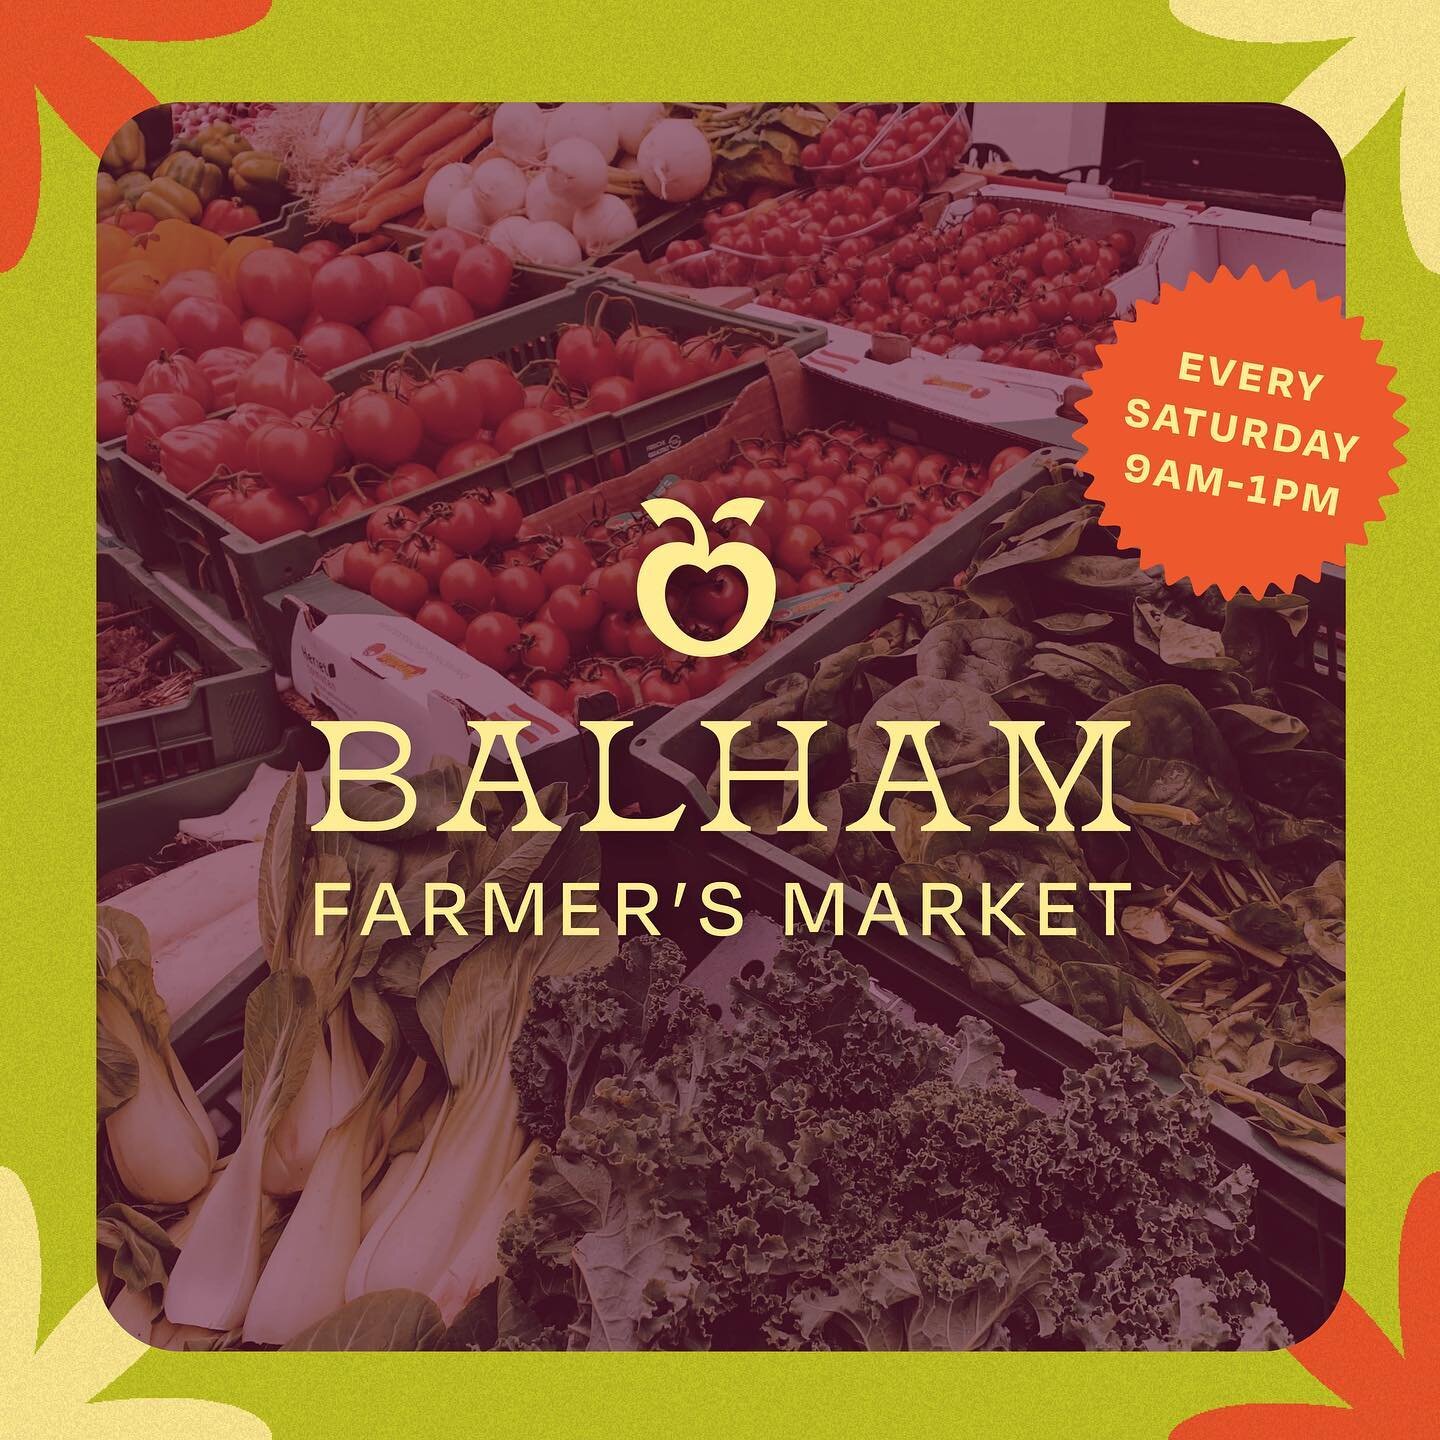 Balham Farmer&rsquo;s Market 🥬🍠🍋 Branding concept designs🧀🥖🍅🍏

I visited this great little market the other day and couldn&rsquo;t resist creating a brand identity for it 🍅 This would help promote local vendors and seasonal products 🥬🍏
.
.
